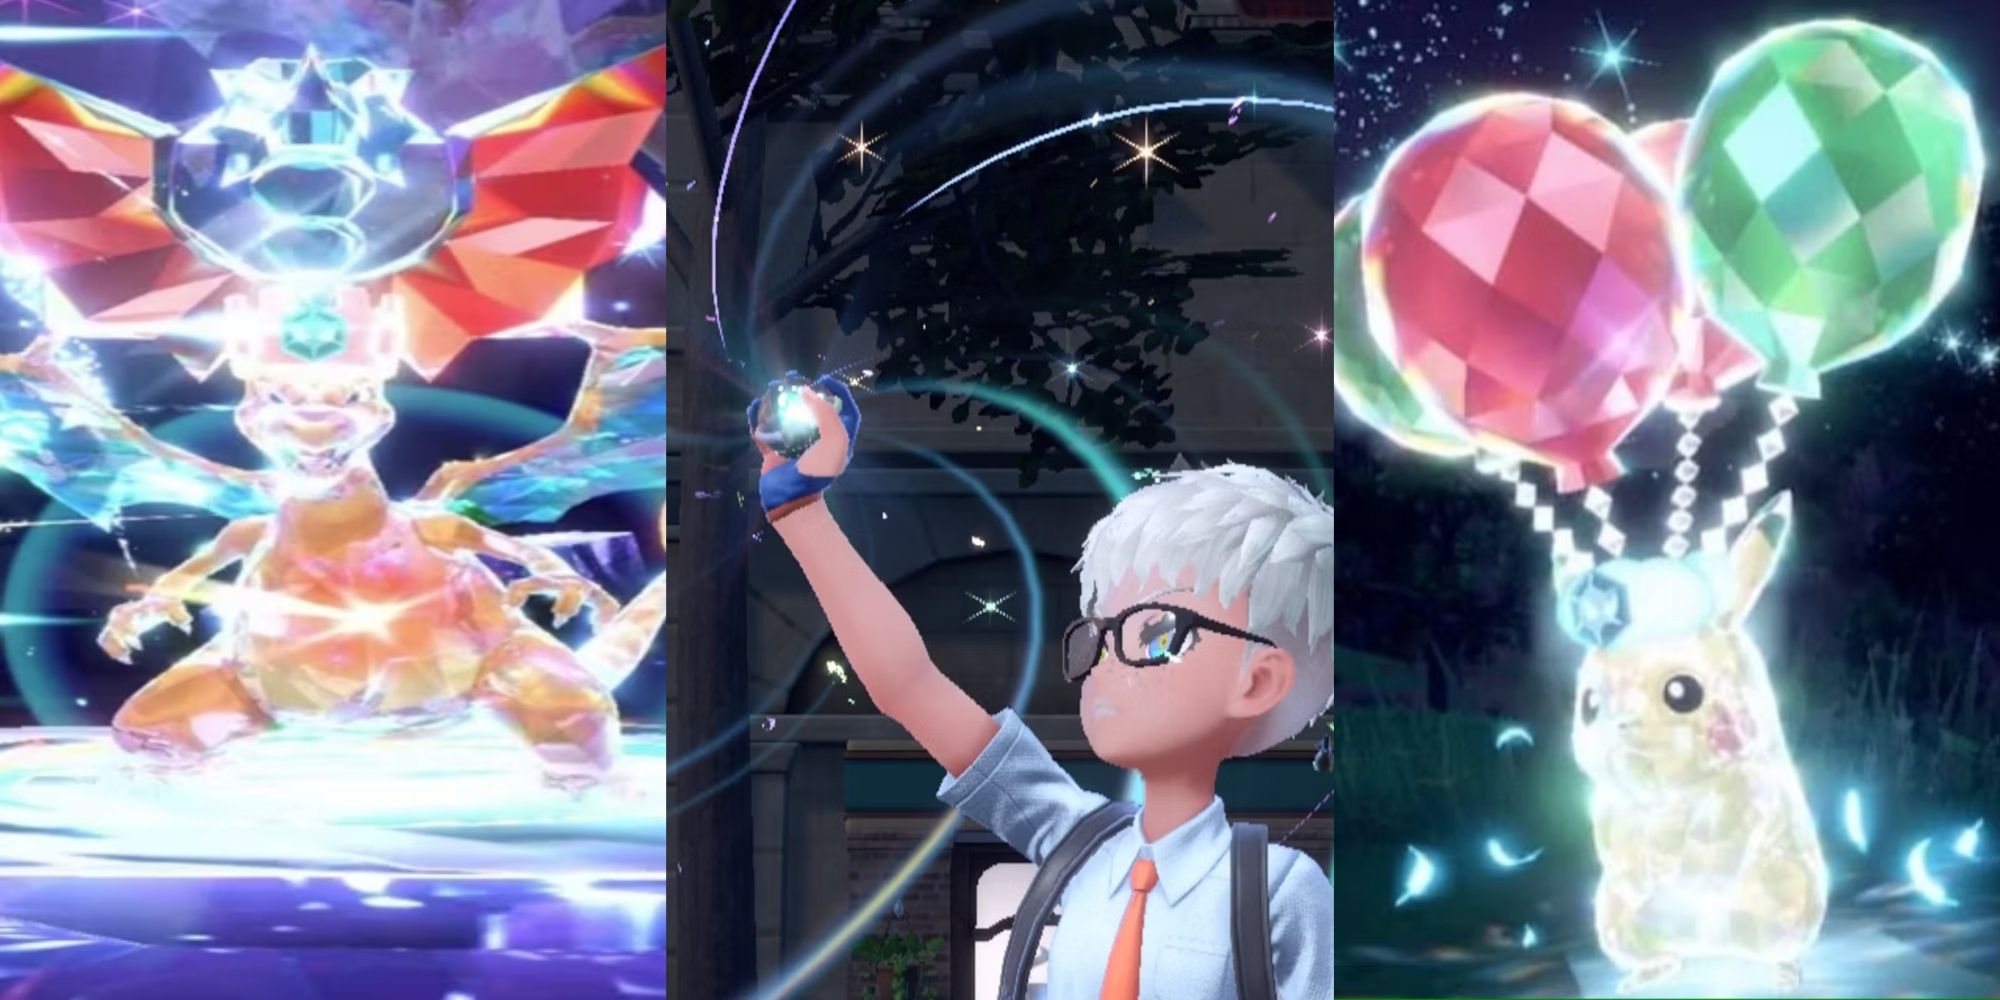 Charizard in a tera raid as a dragon type, your trainer holding a tera orb, and pikachu terrastallizzed as a flying type, left to right